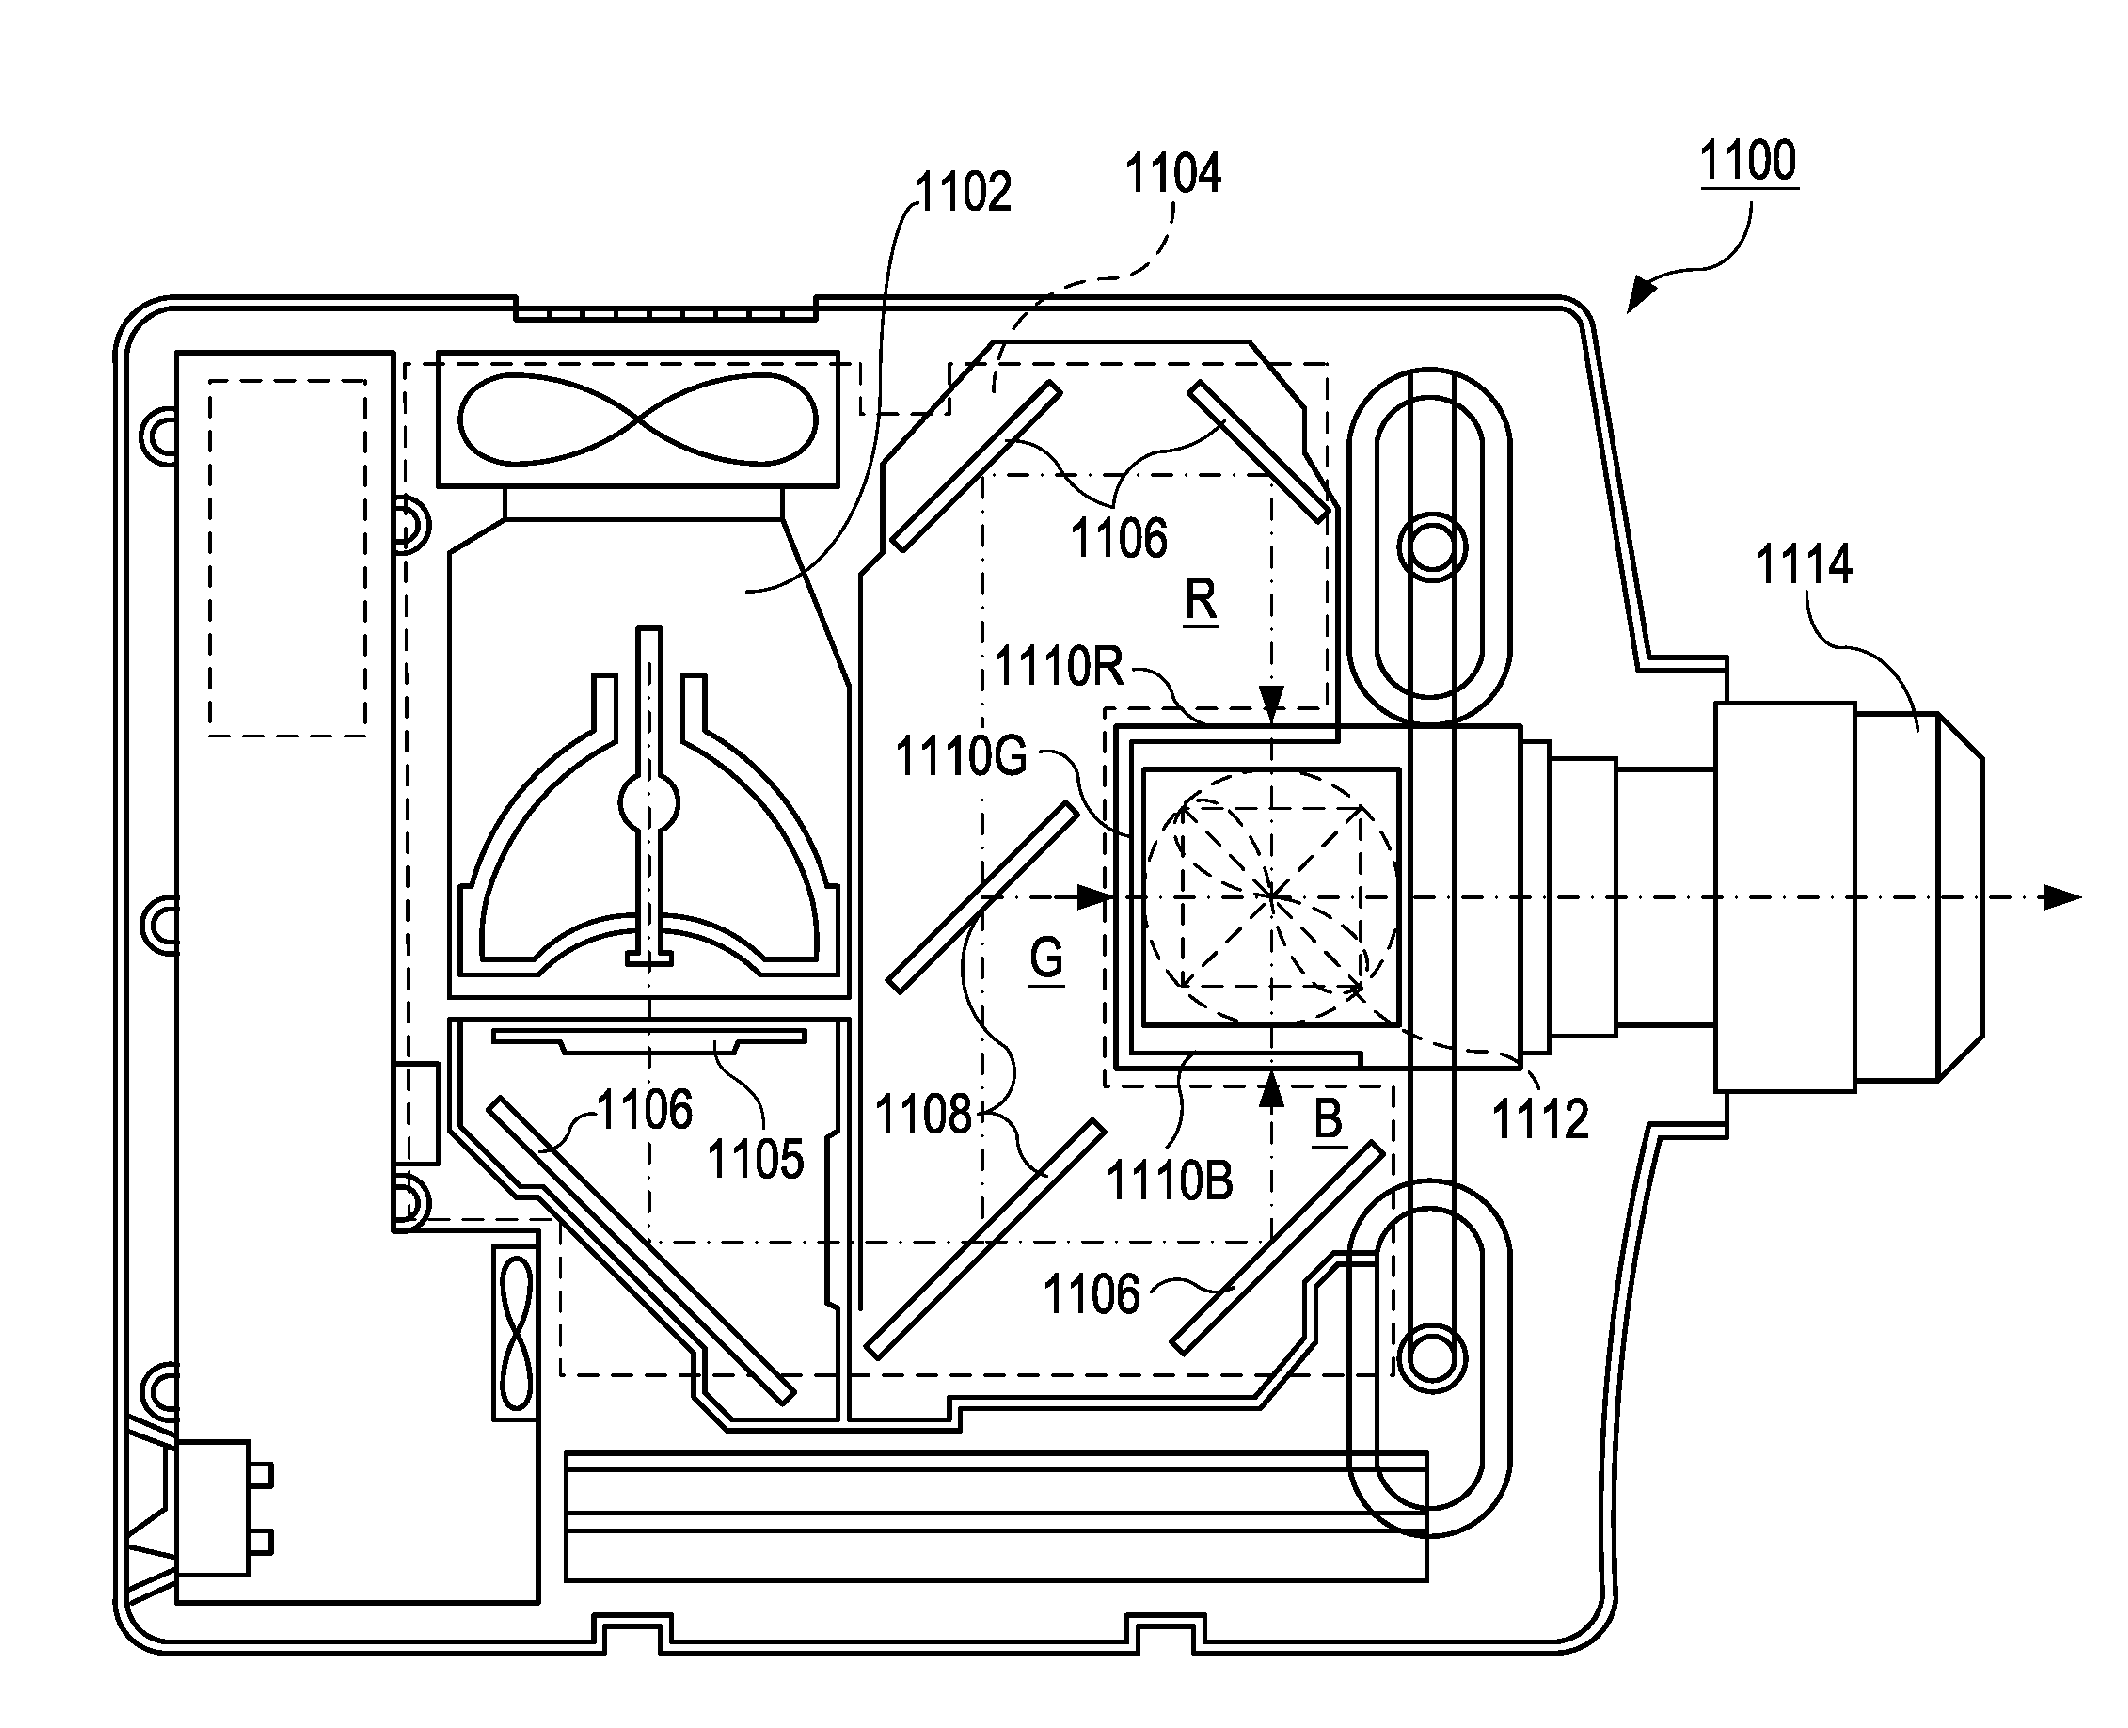 Liquid crystal device and projector